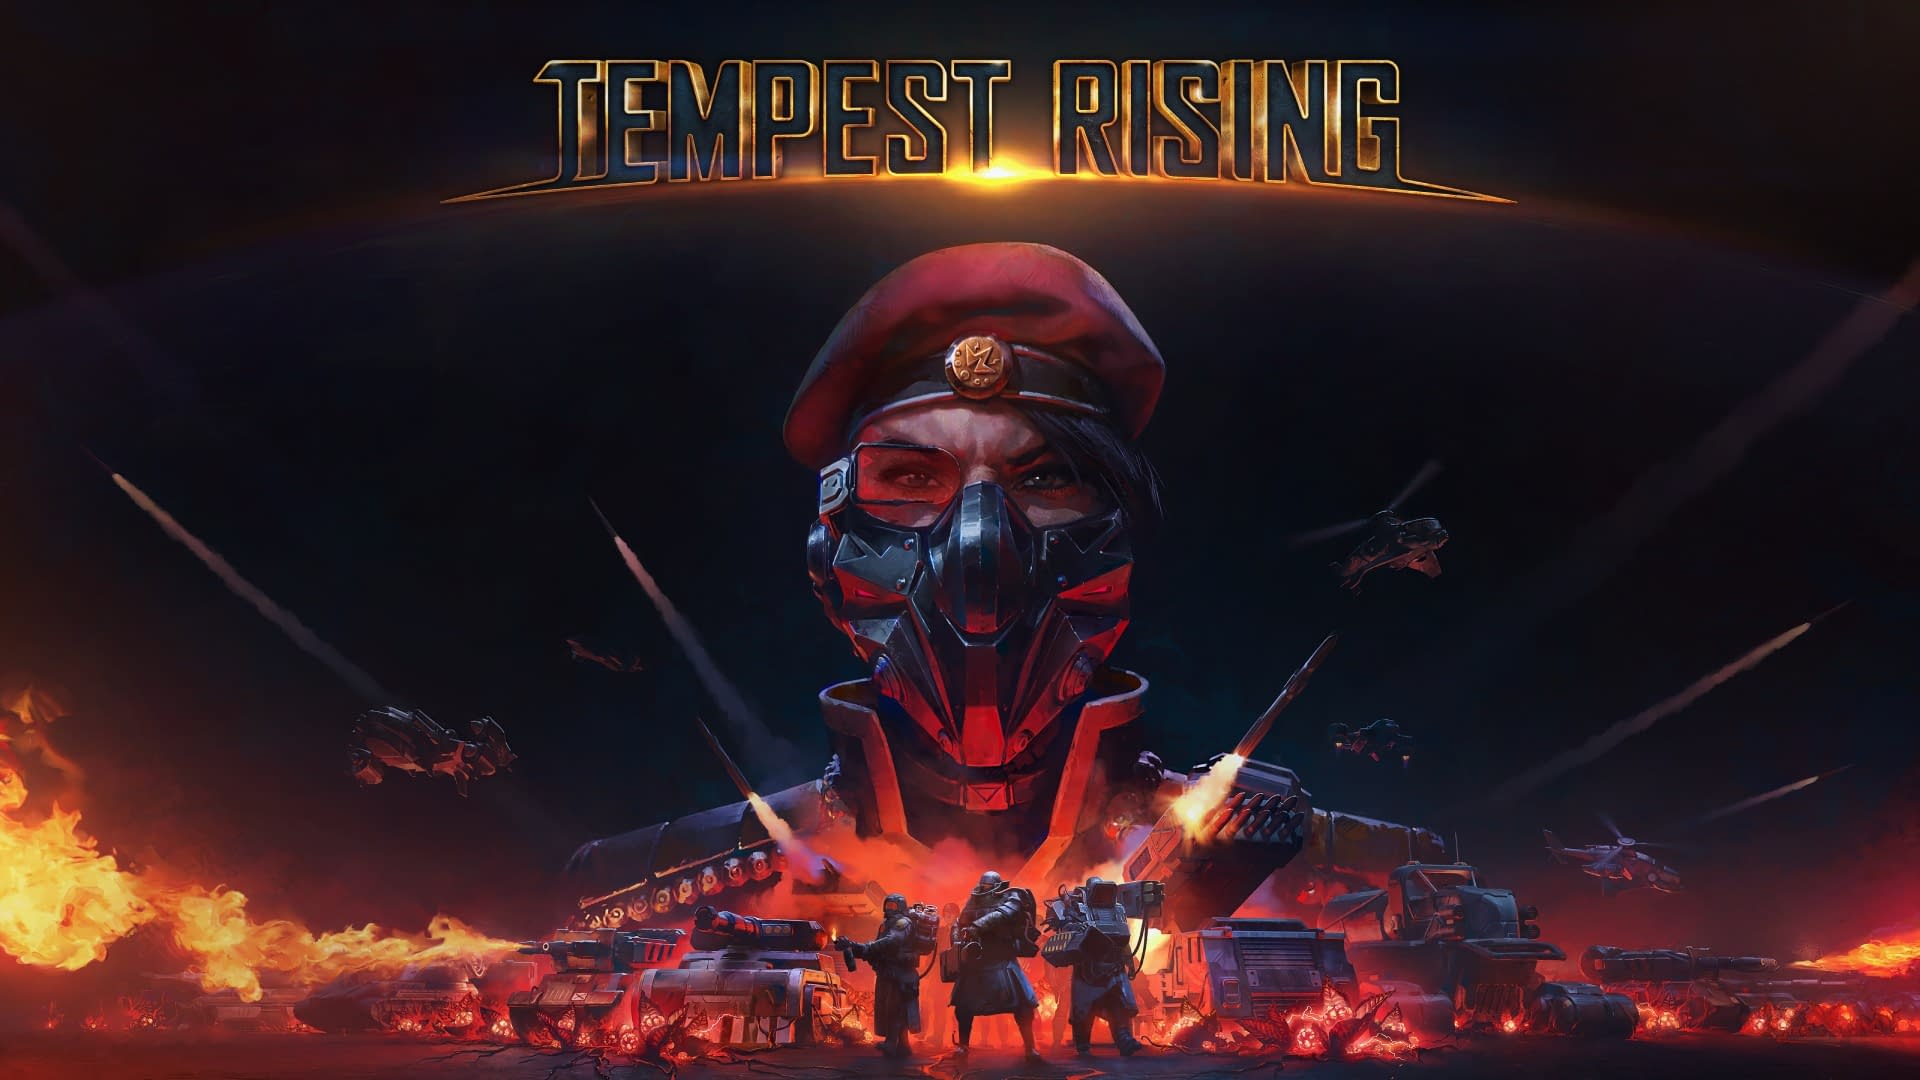 Tempest Rising Demo Version Released: Valid for Limited Time